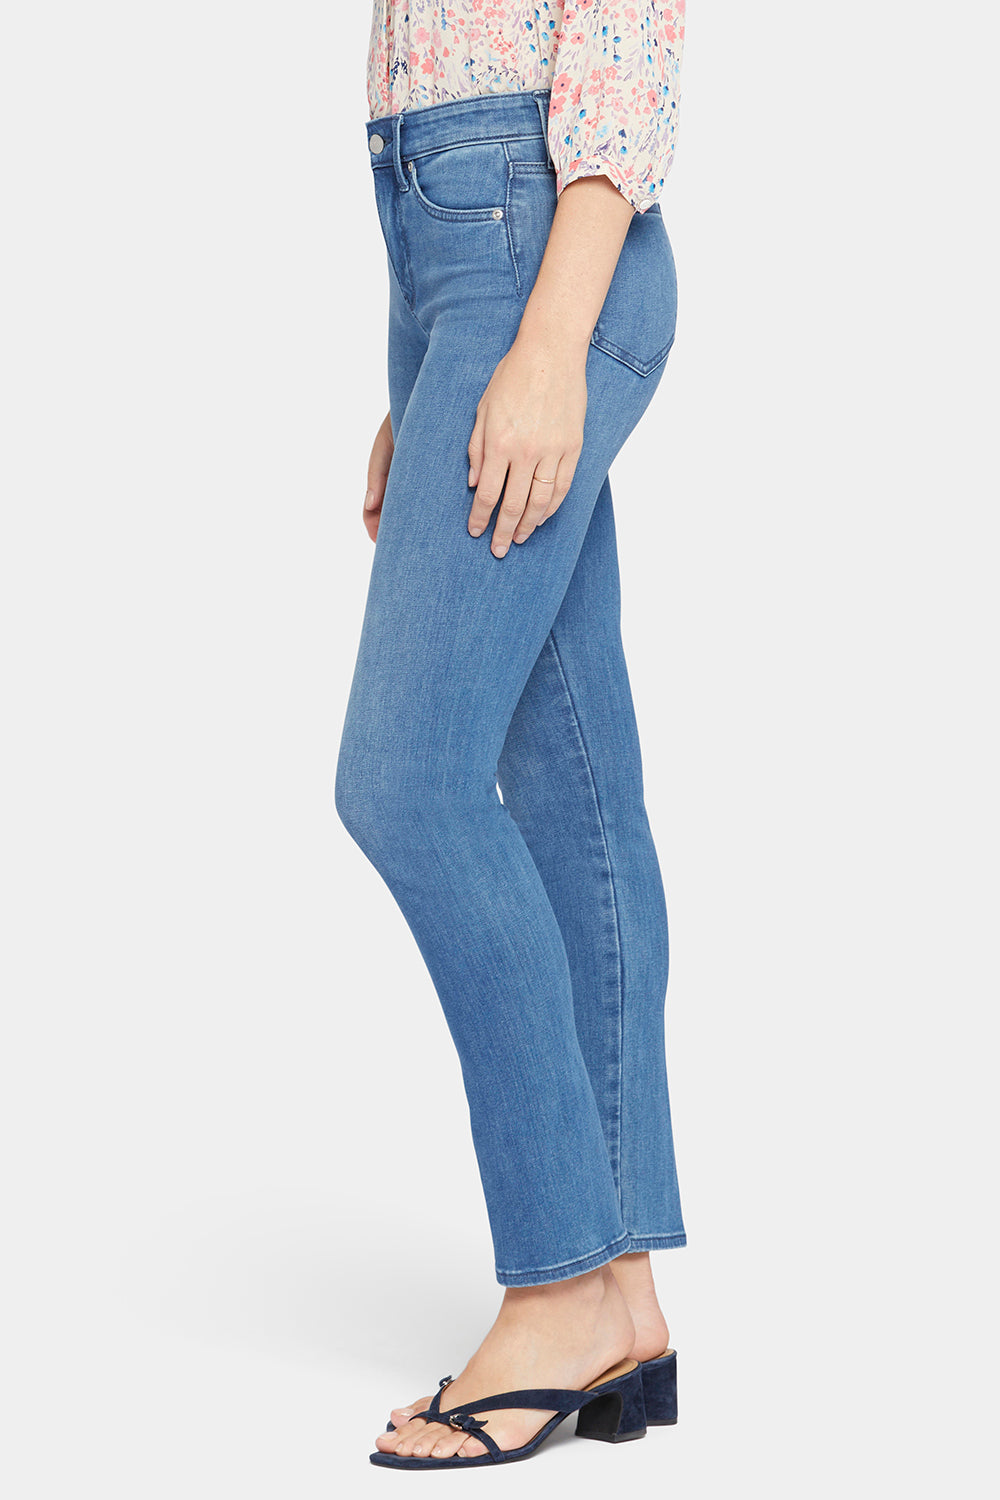 NYDJ Le Silhouette Sheri Slim Jeans In Tall With 34